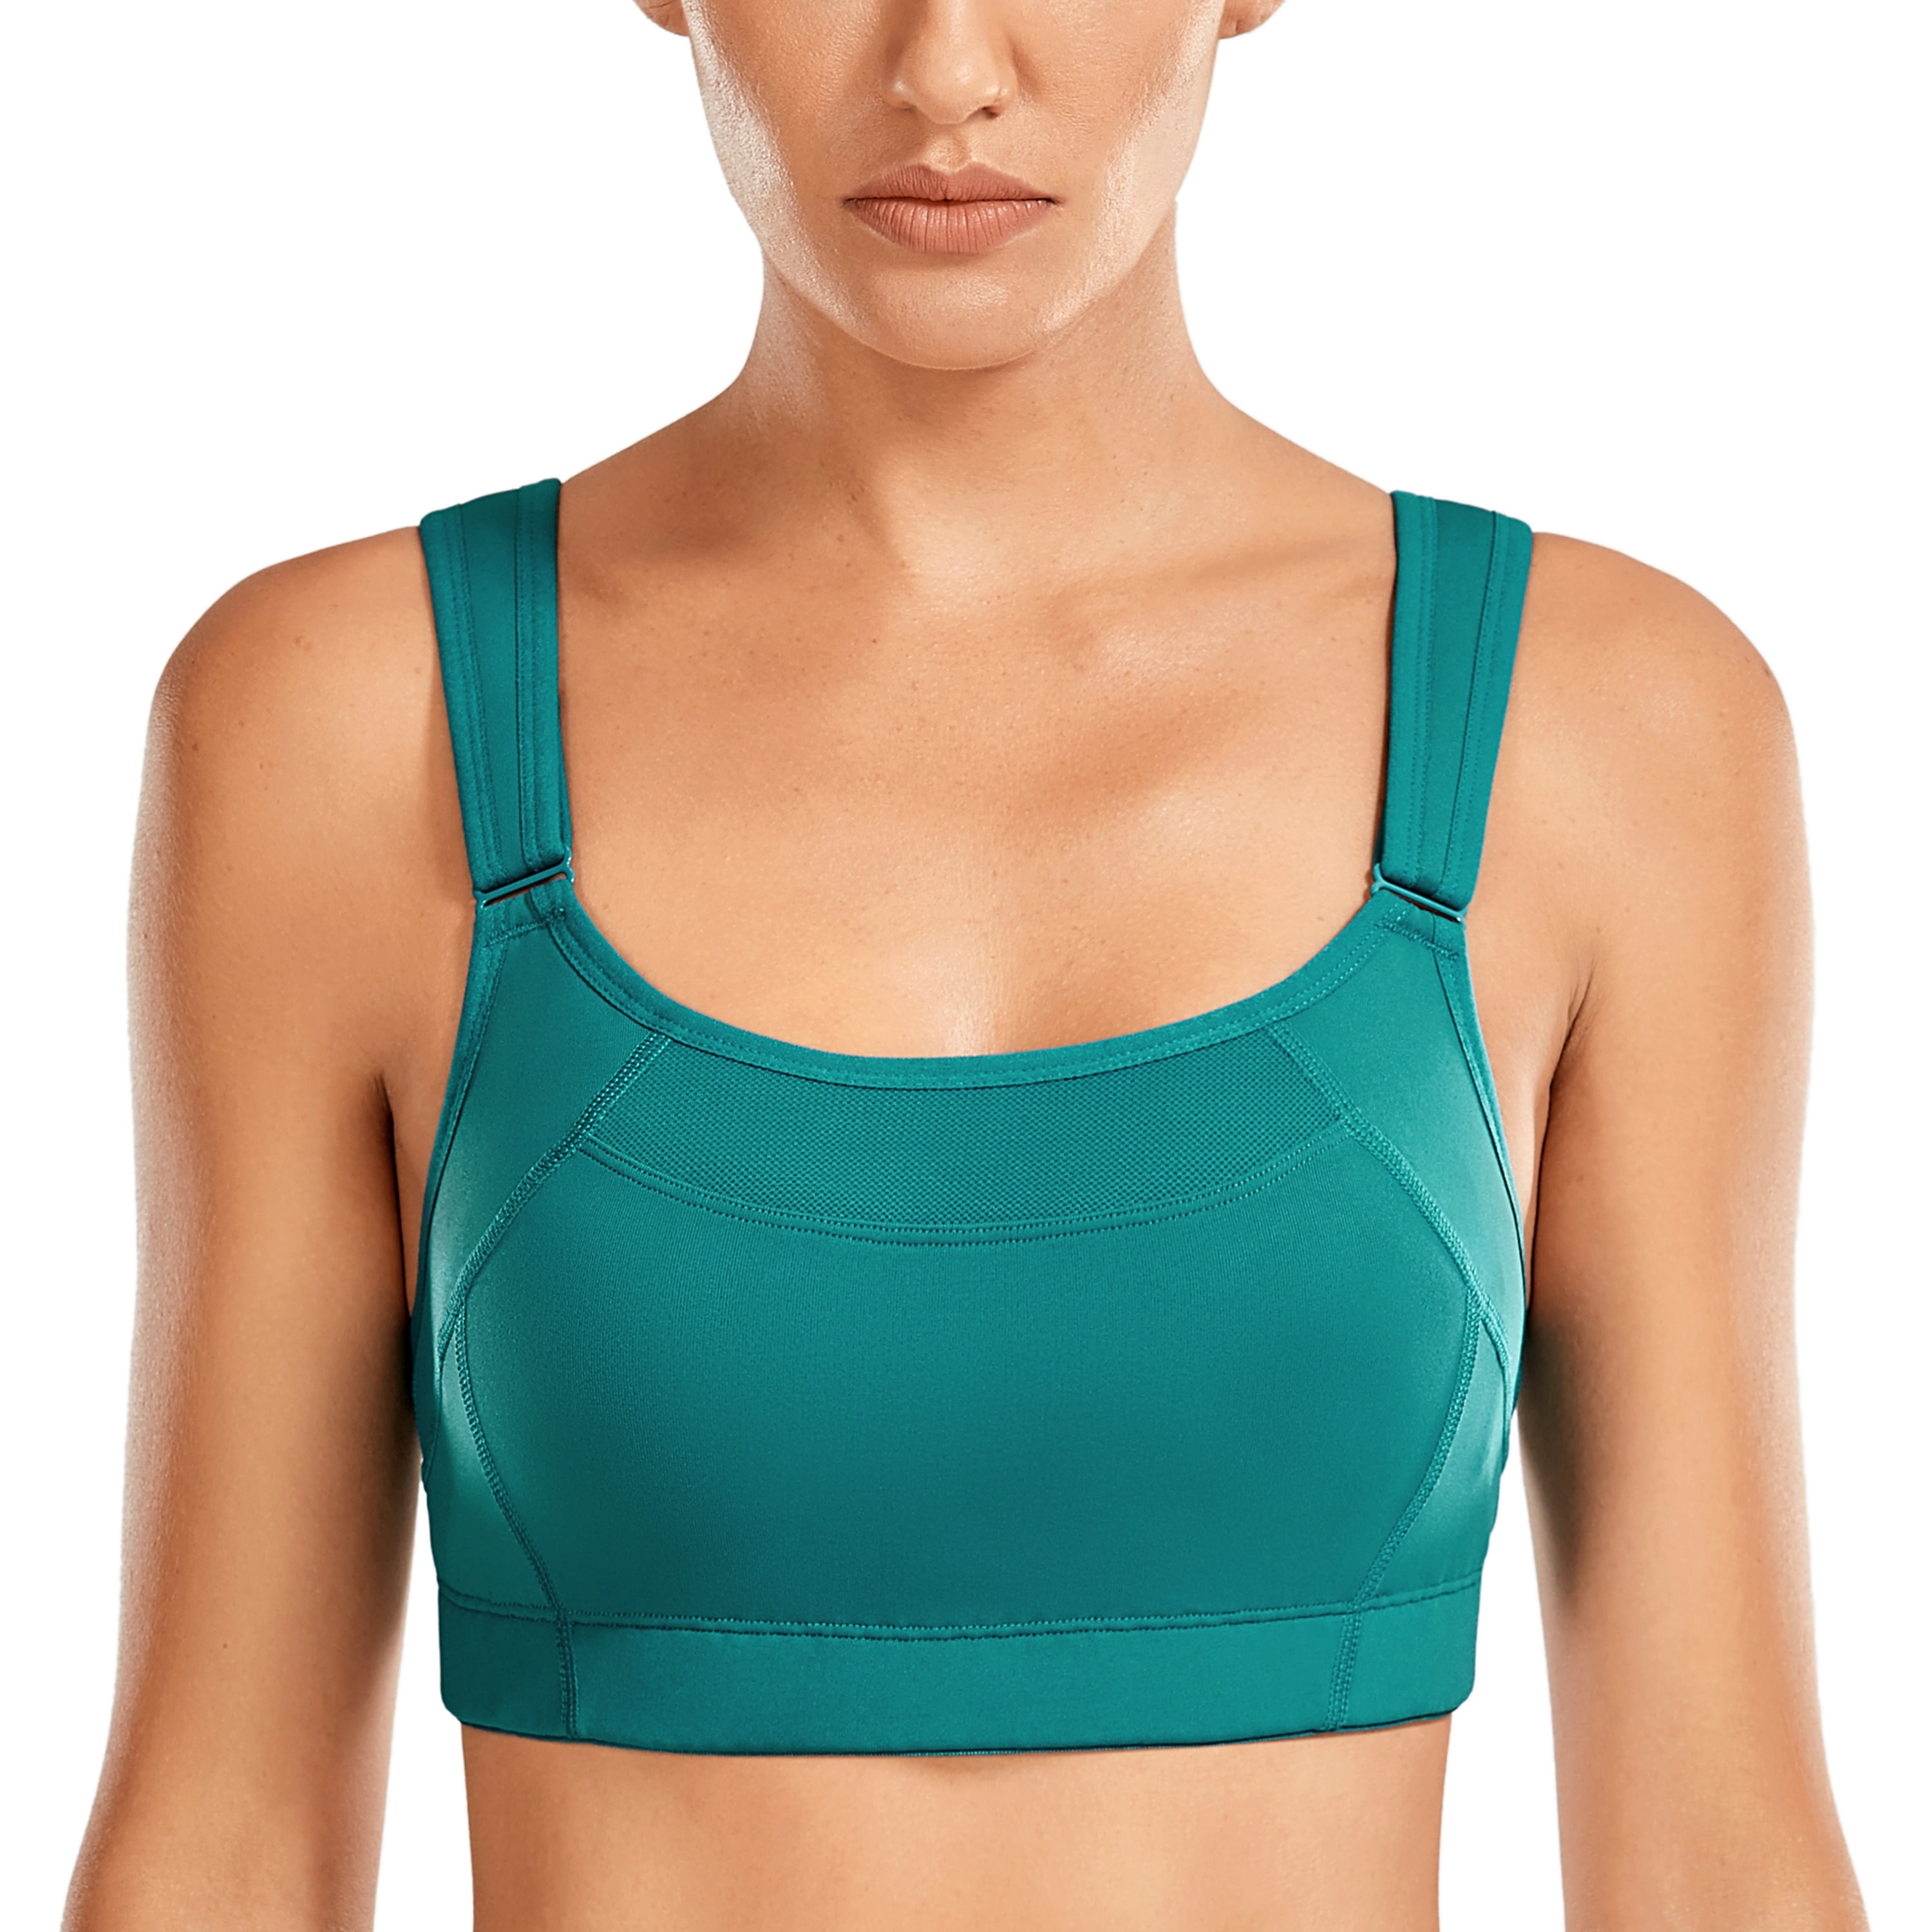 SYROKAN Womens Sports Bra Wireless Support and Comfort Workout Bra with Adjustable Straps 